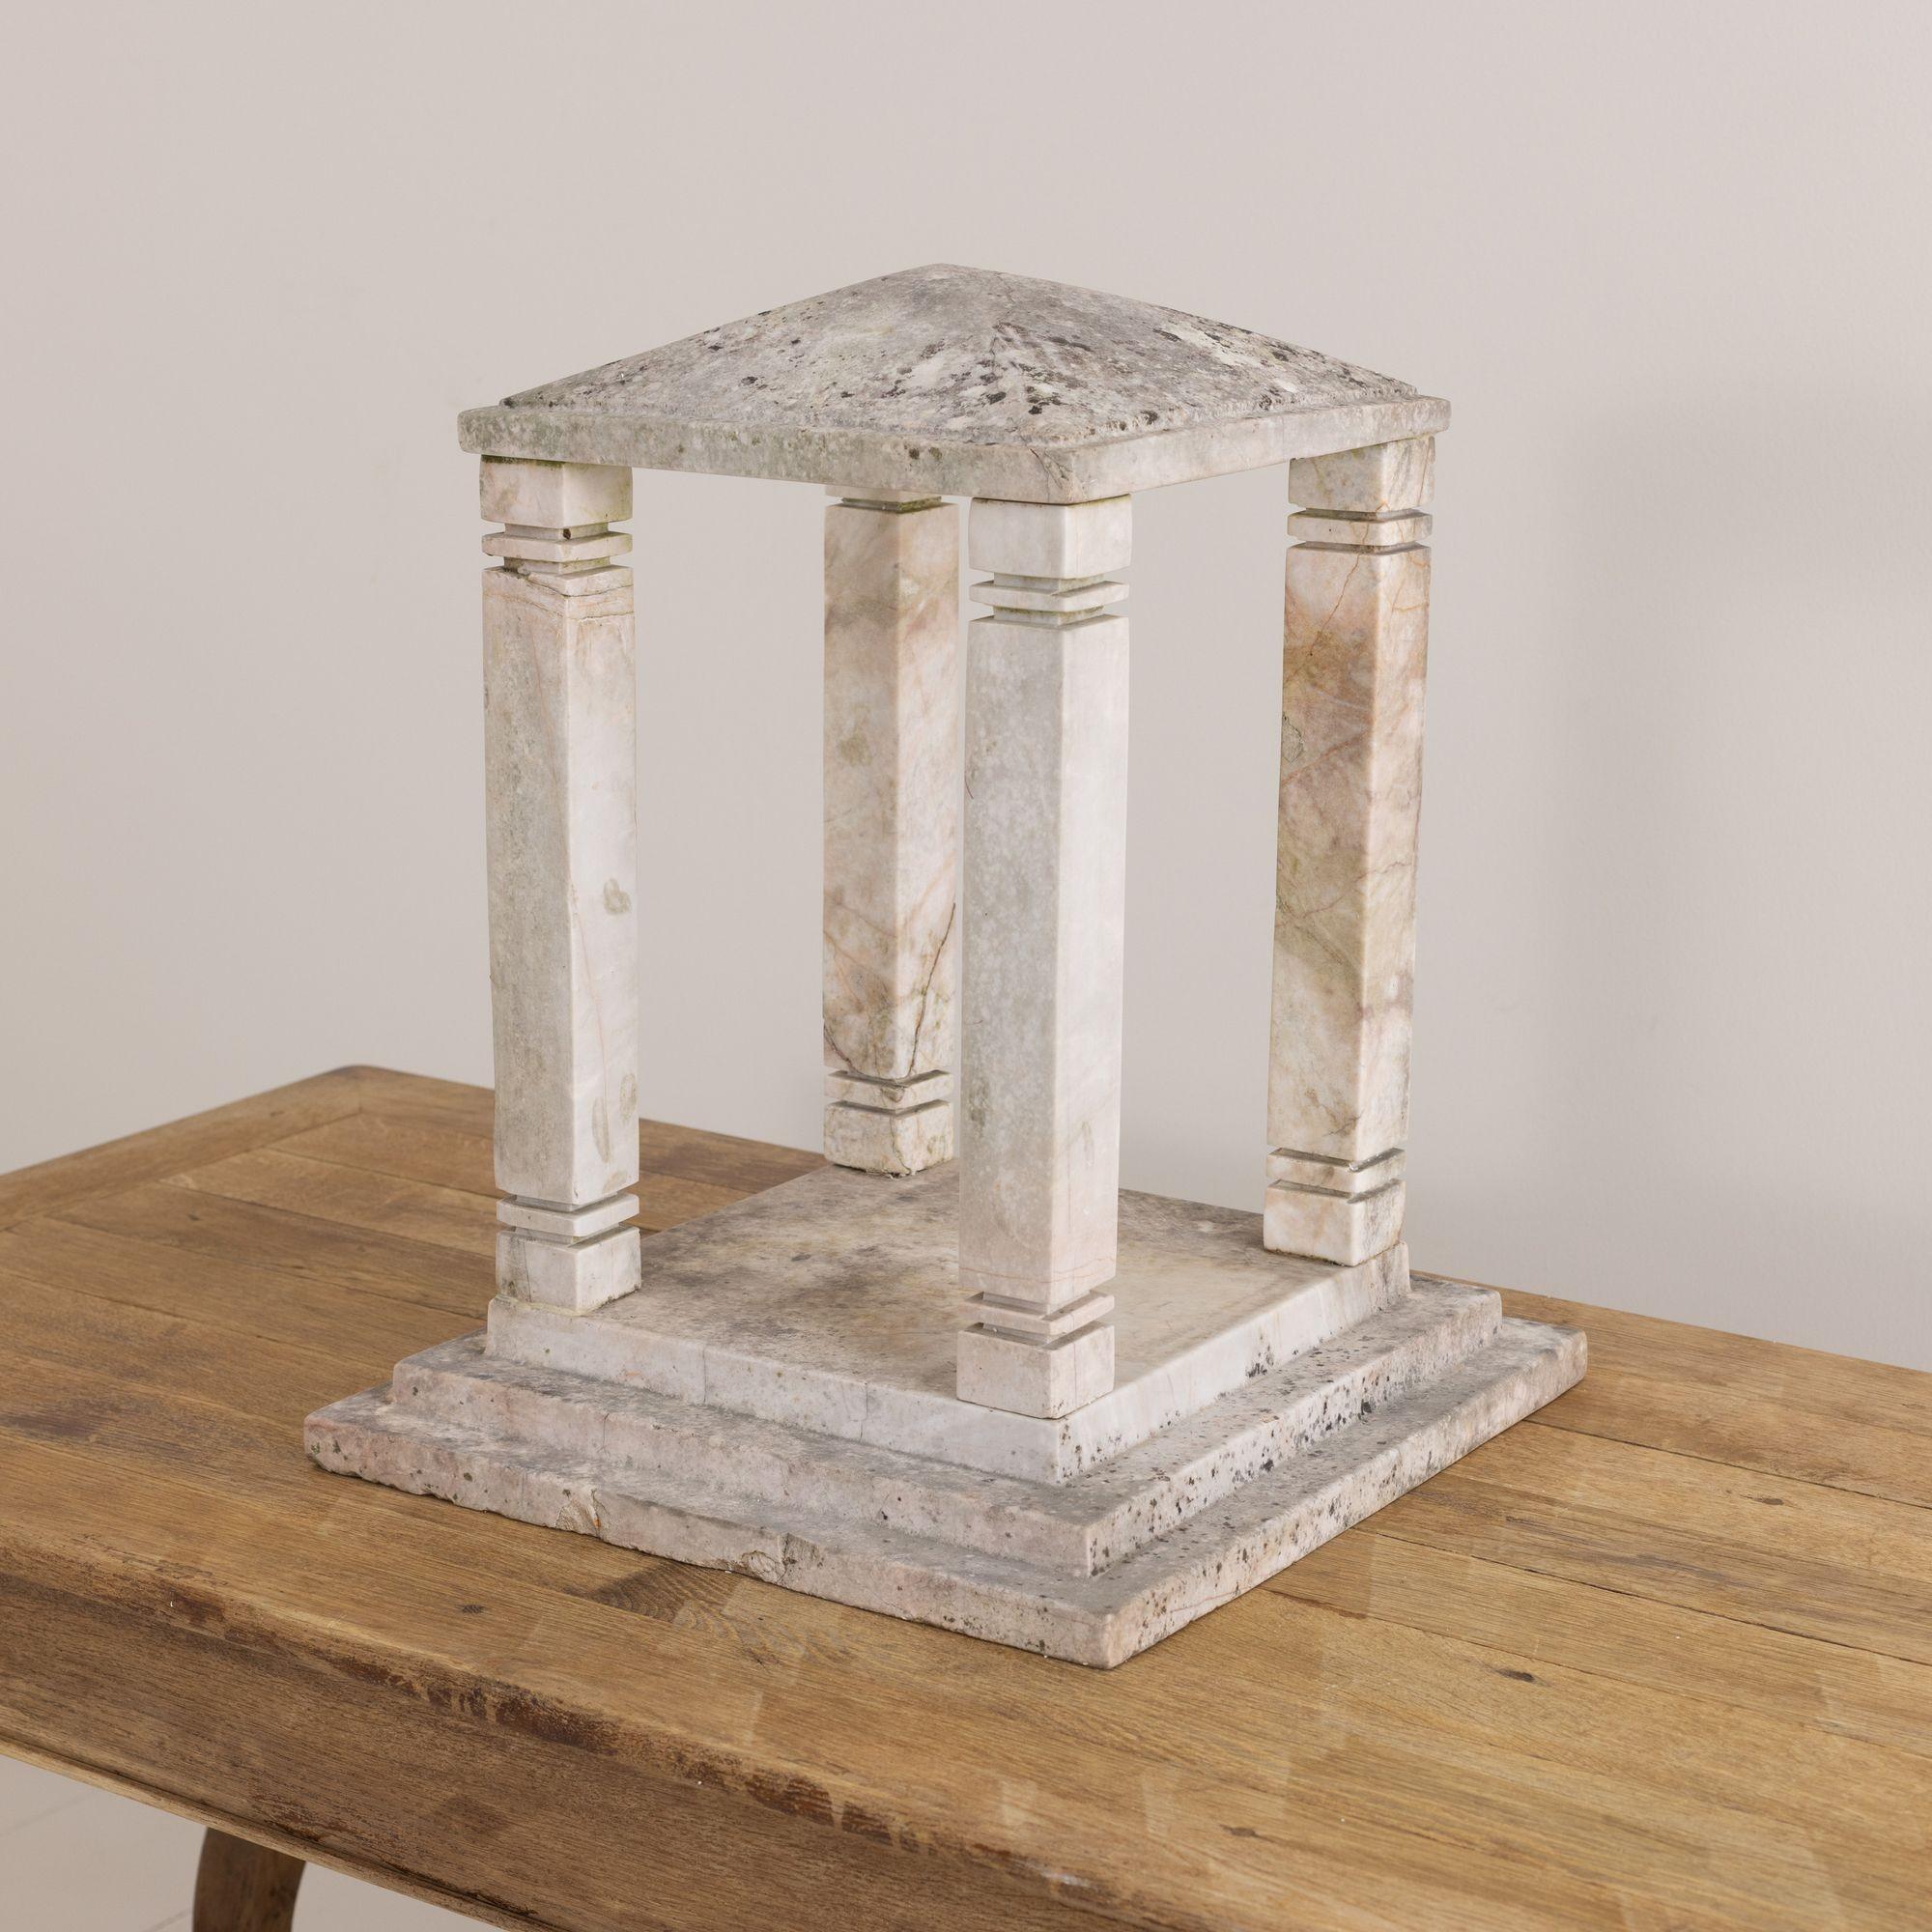 A unique marble bird house with a beautiful, naturally weathered patina from a country house in France. This piece is highly decorative with a unique sculptural quality


We offer expedited, fully-insured, custom packaged / crated, global shipping,